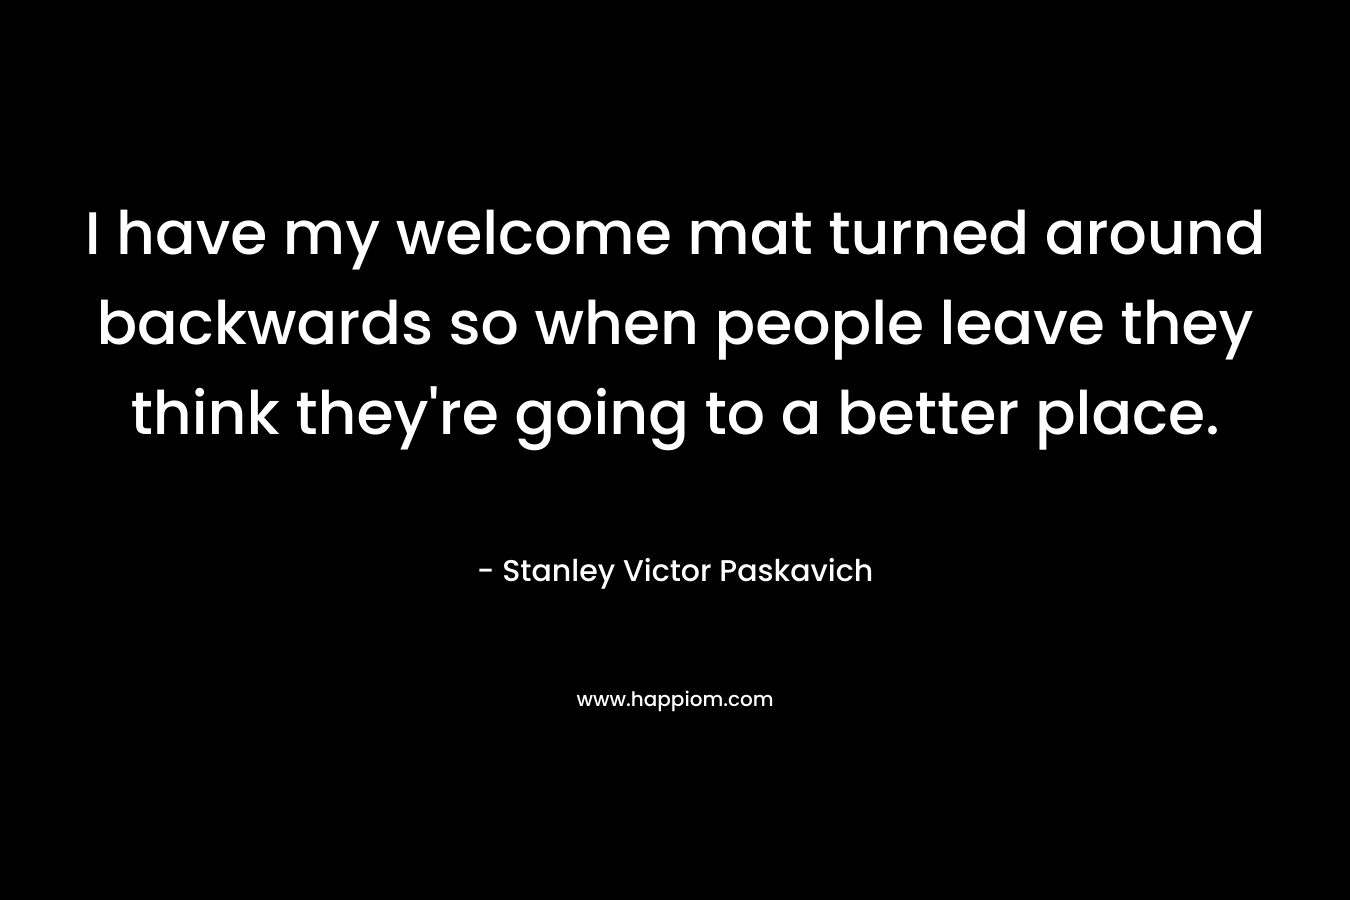 I have my welcome mat turned around backwards so when people leave they think they're going to a better place.